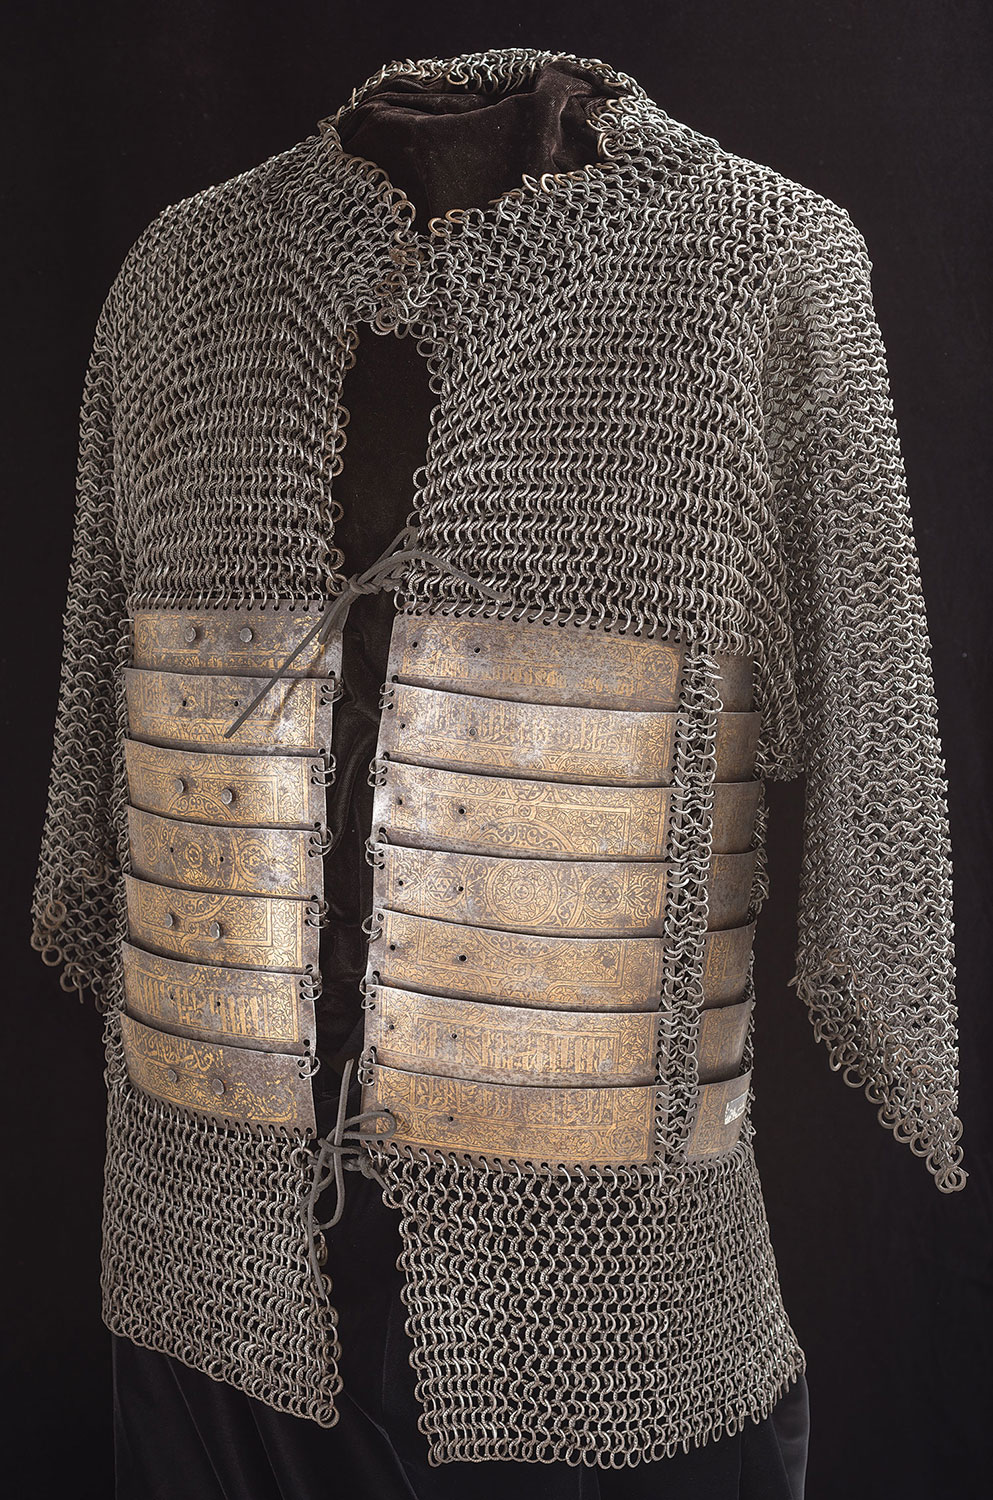 Egyptian Armor Sells for $2.3 Million at Rock Island Auction Co.